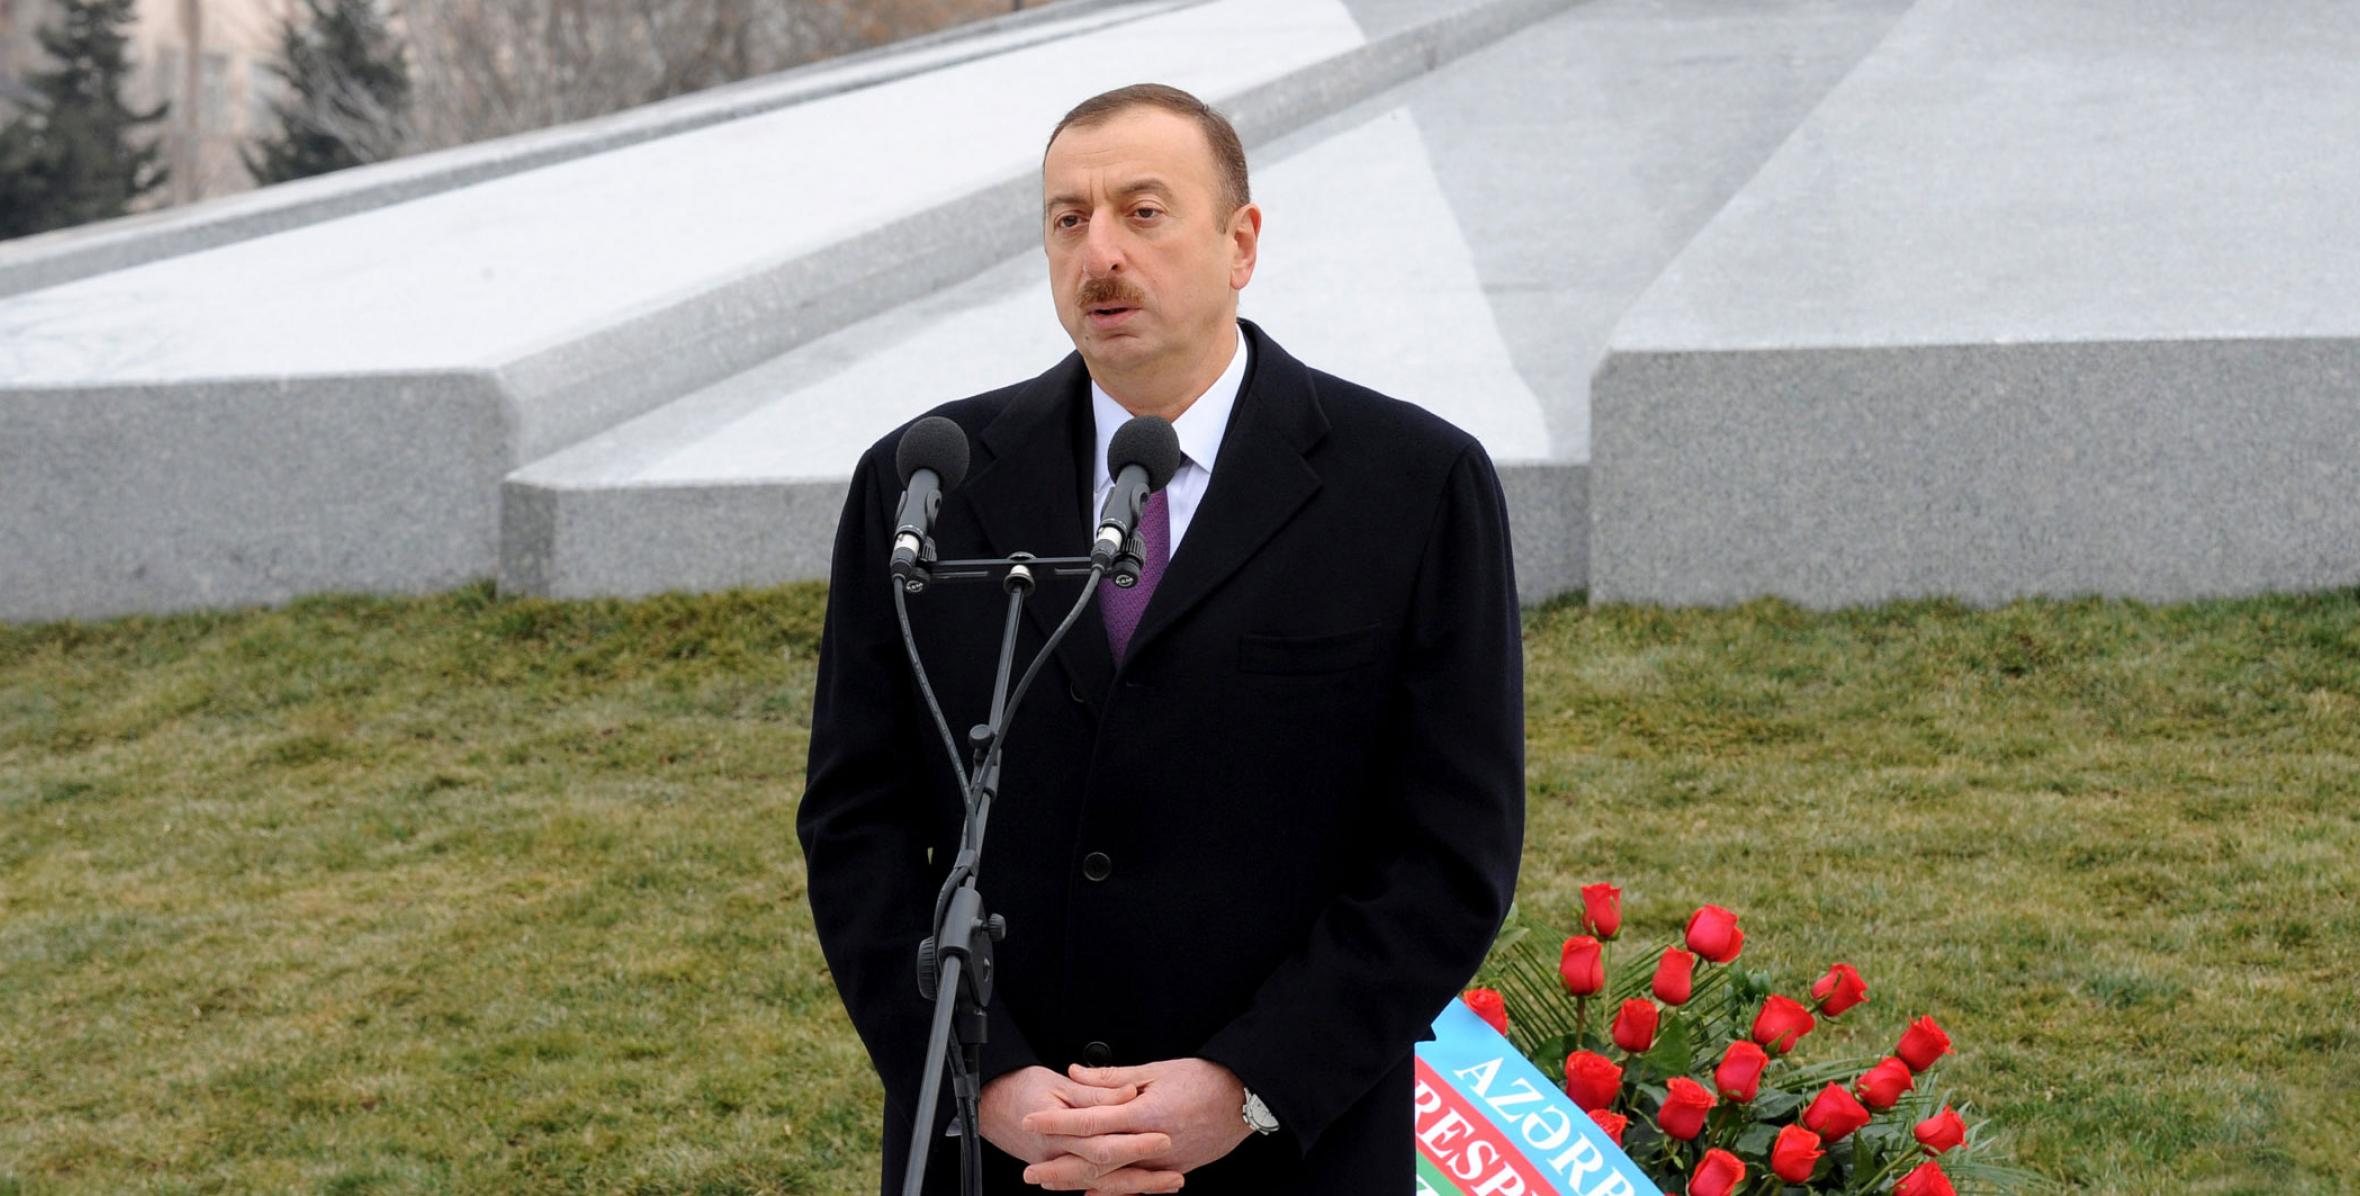 Speech by Ilham Aliyev at the ceremony to unveil the statue of national hero Koroglu